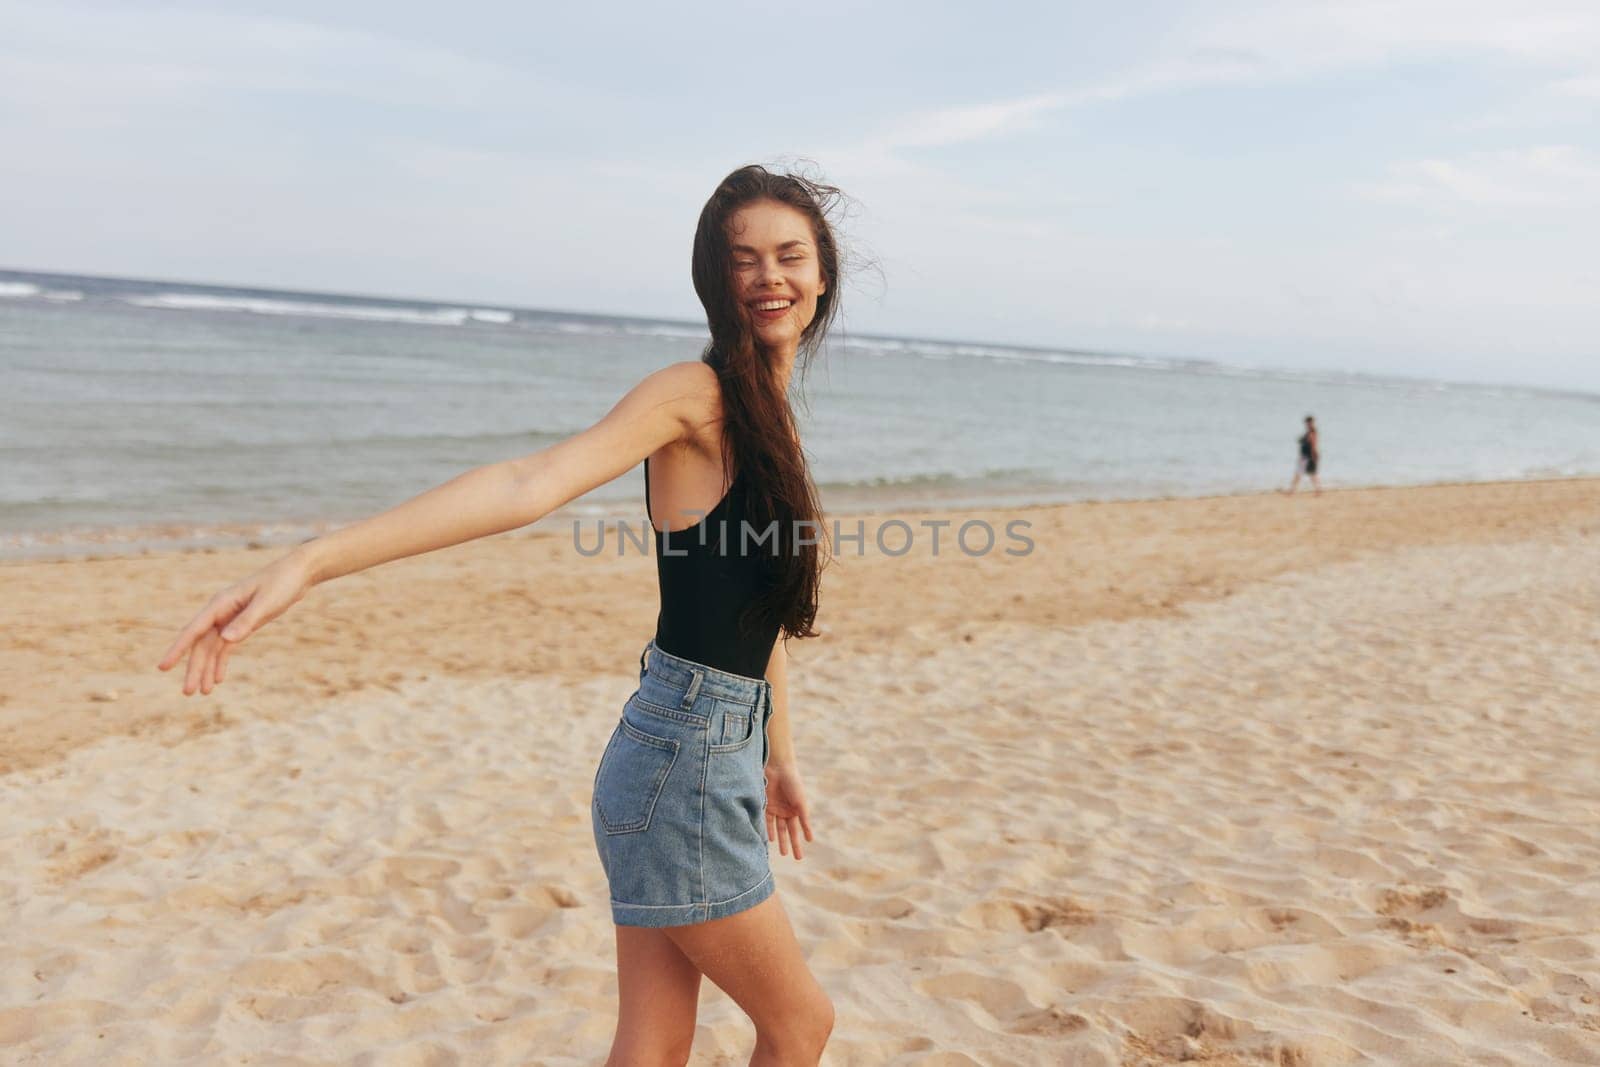 beach woman smile ocean peaceful sea vacation sunset sand summer lifestyle by SHOTPRIME